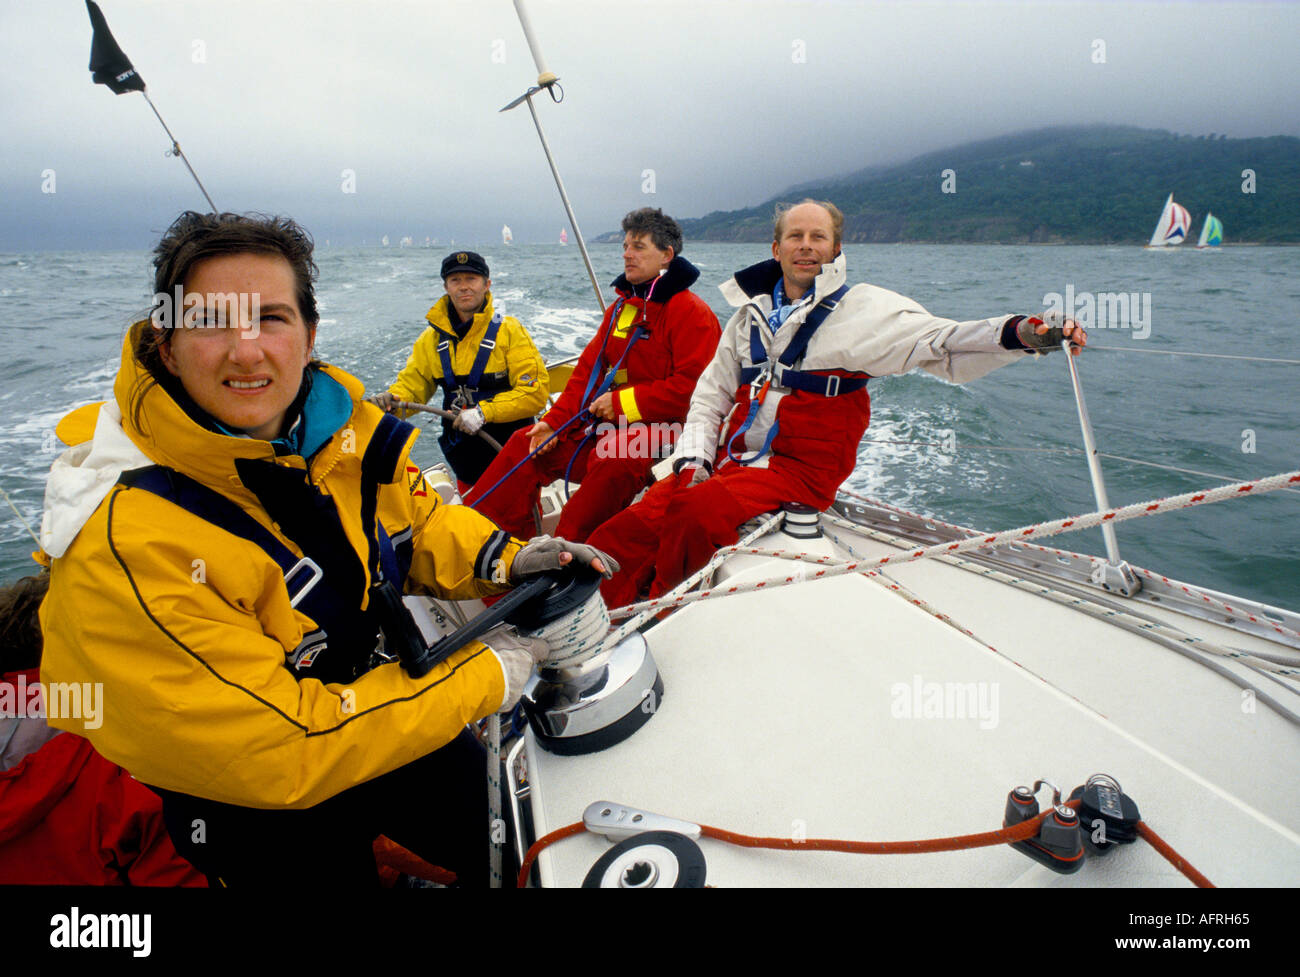 Woman Yacht Racing. Sailing racing yacht. Crew in The Round the Island Race race the Isle of Wight England 1980s HOMER SYKES Stock Photo